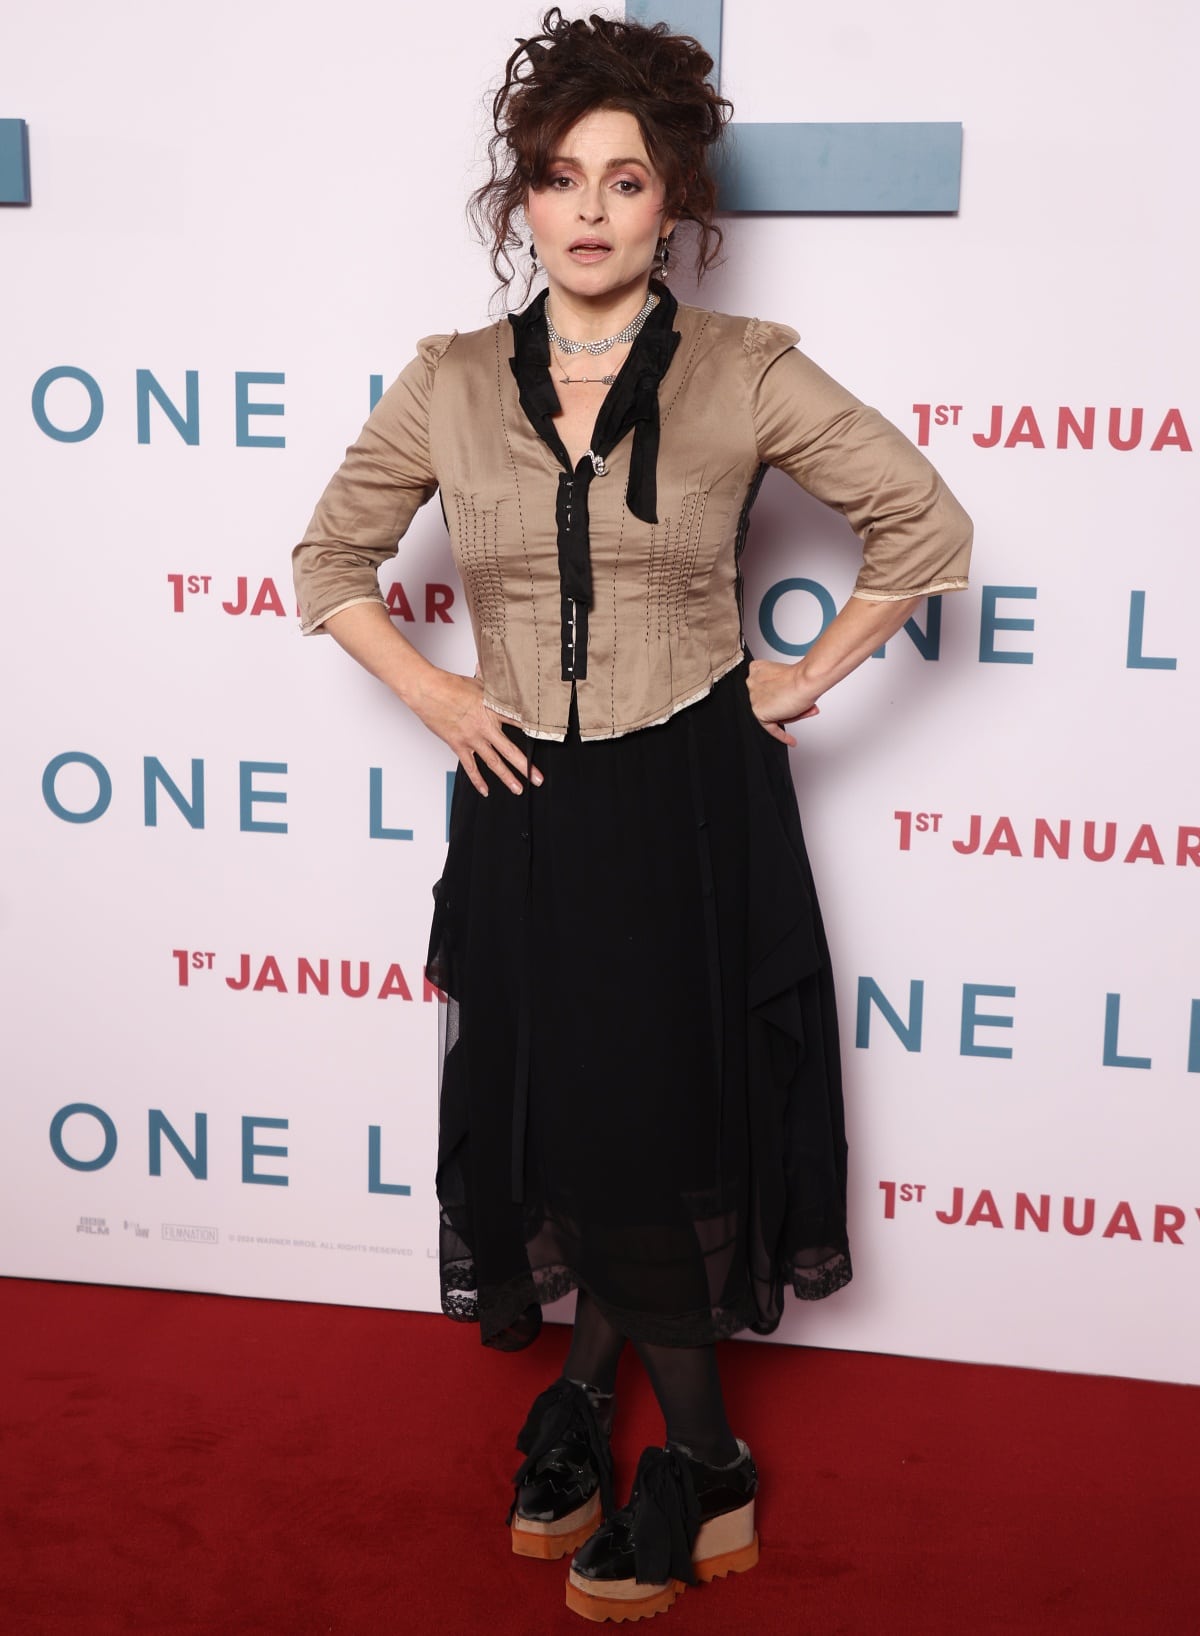 Helena Bonham Carter wearing a beige silk blouse and a black skirt at the special screening of One Life